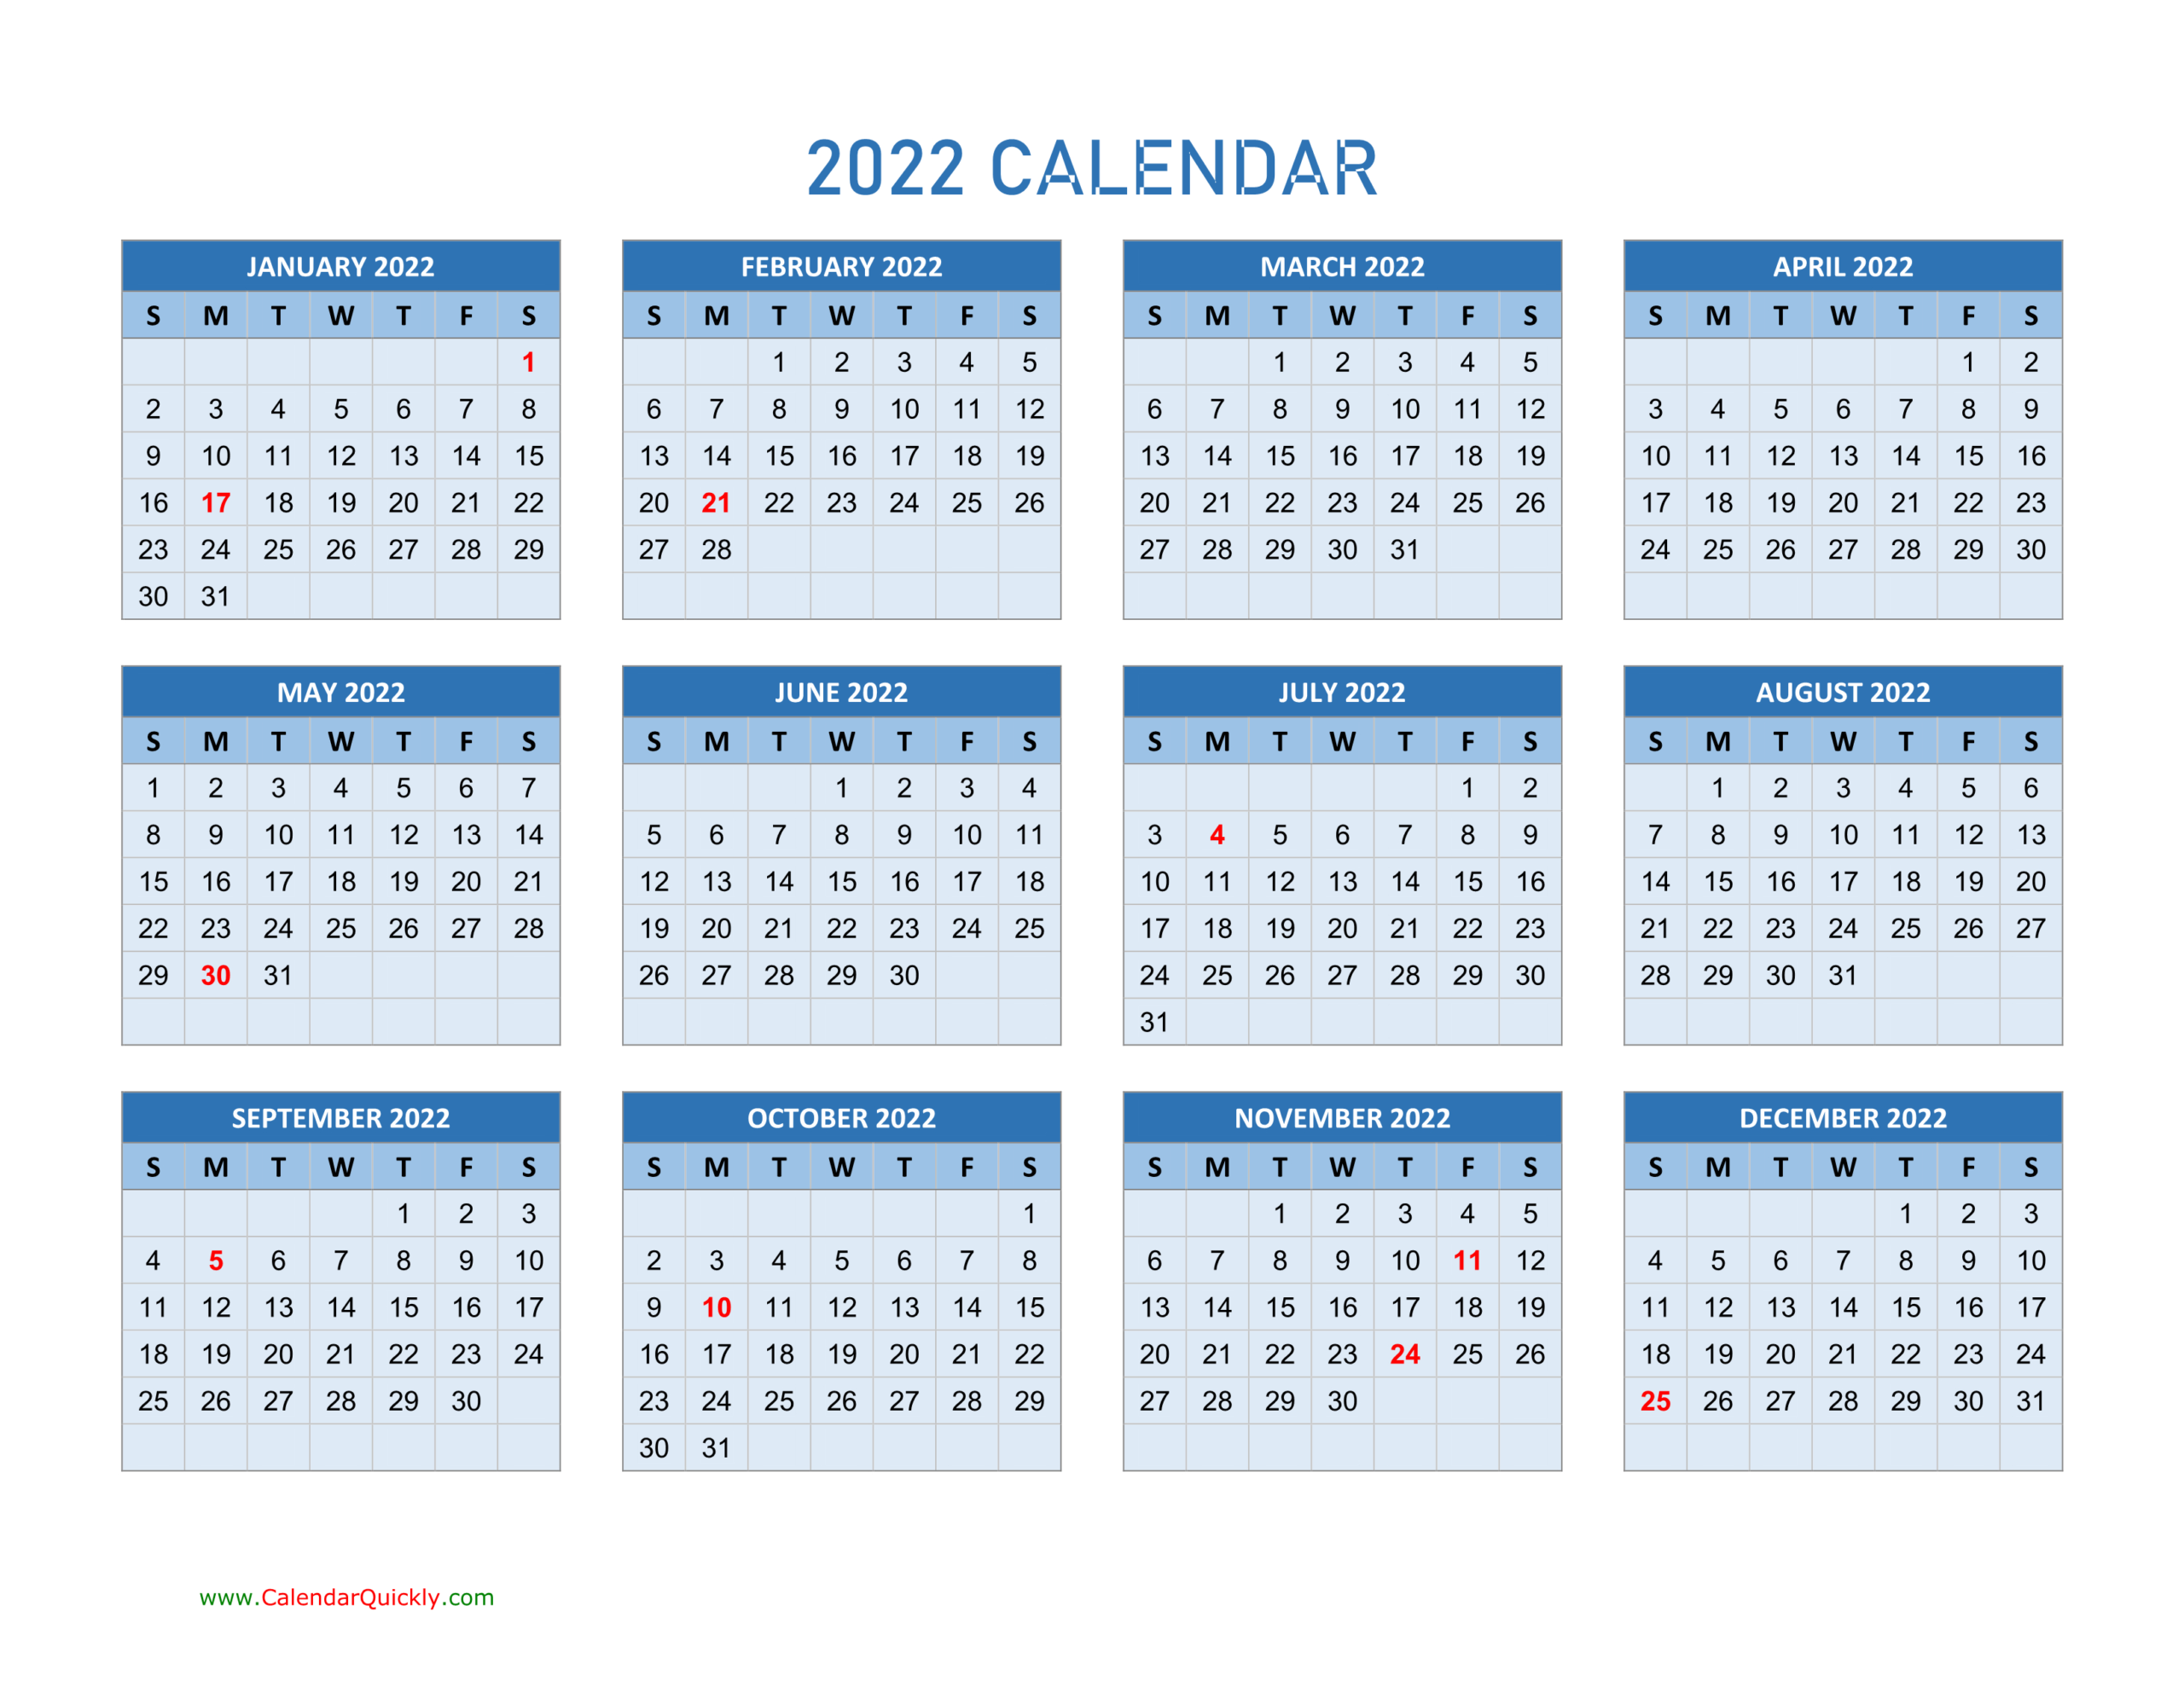 Year 2022 Calendars | Calendar Quickly  Free Printable Calendar With Grid Lines 2022